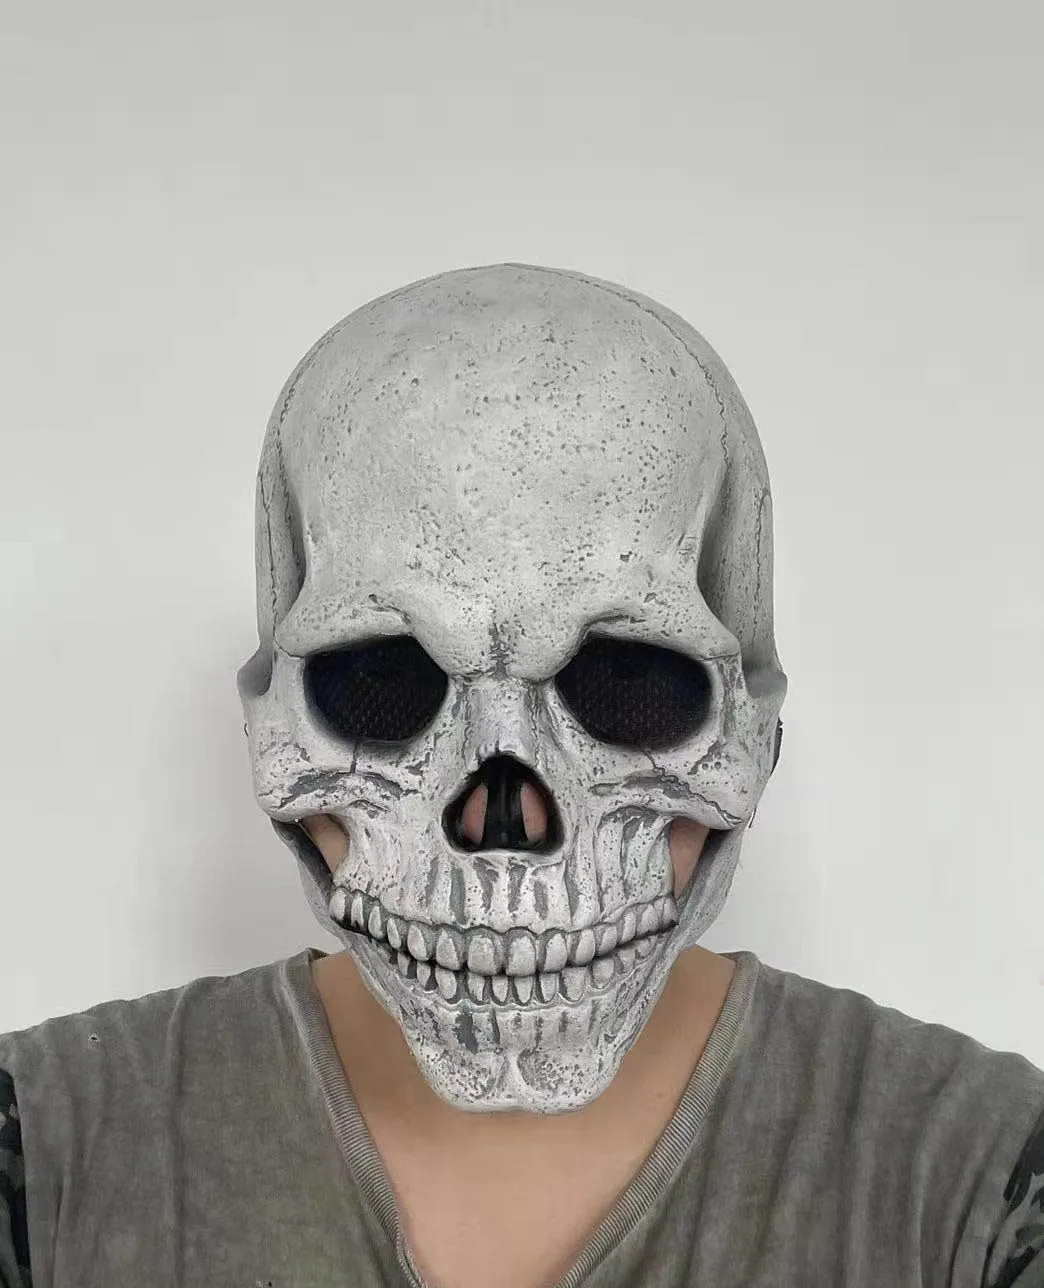 Halloween Full Head Skull Mask Helmet With Movable Jaw Entire Realistic Look Adult Latex 3D Skeleton Scary Skulls Masks HH21-513